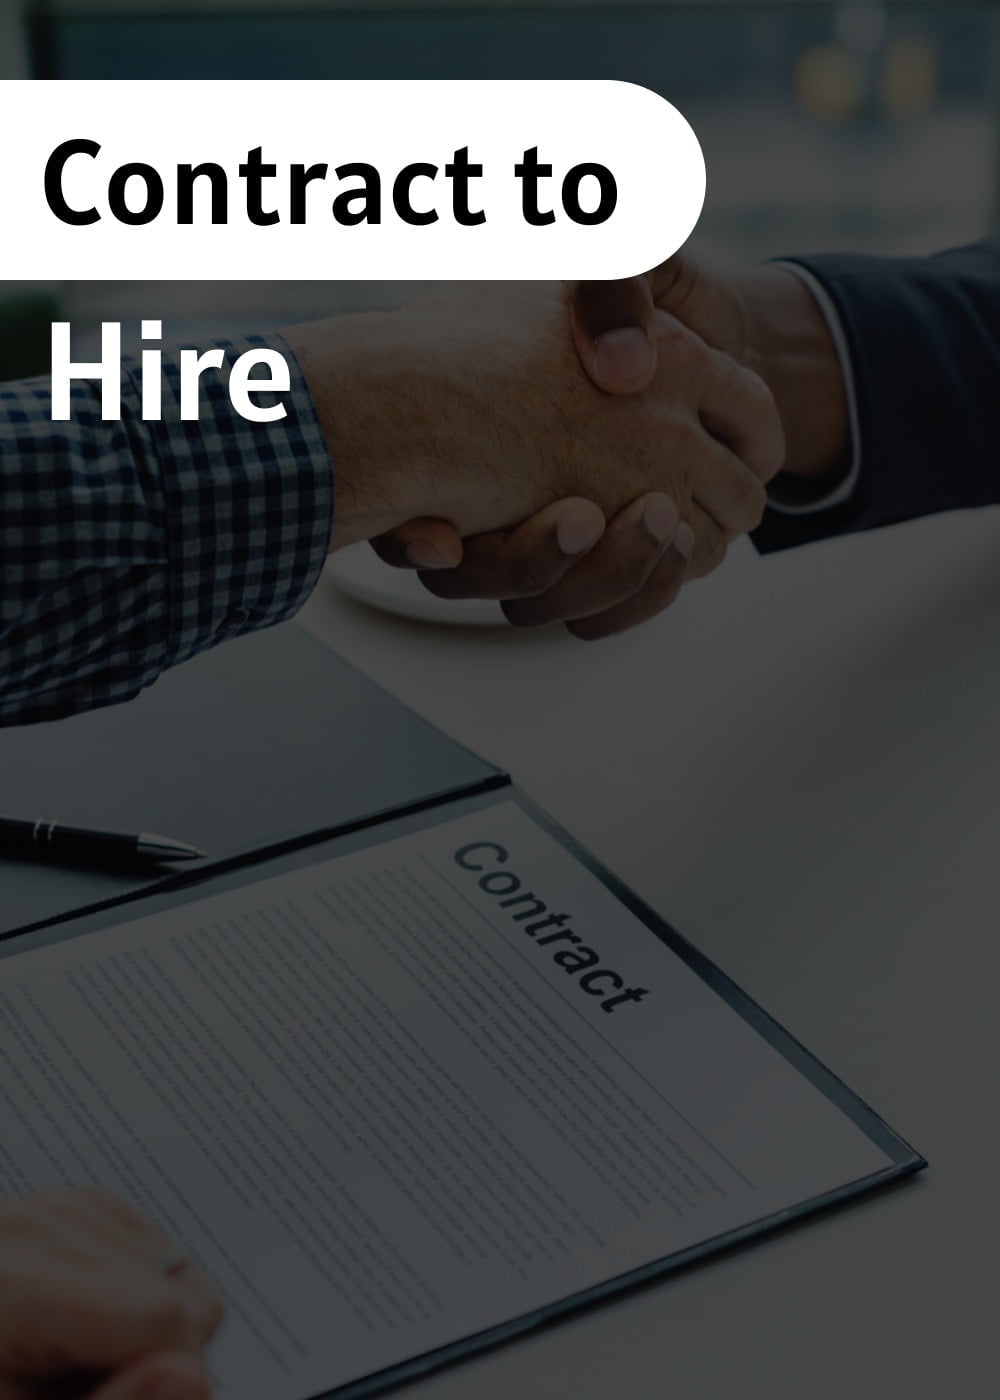 Our contract-to-hire services allow you to evaluate a candidate's skills and cultural fit before committing to a permanent hire. This option provides a risk-free way to assess a candidate's performance and ensure they are the right fit for your team. 